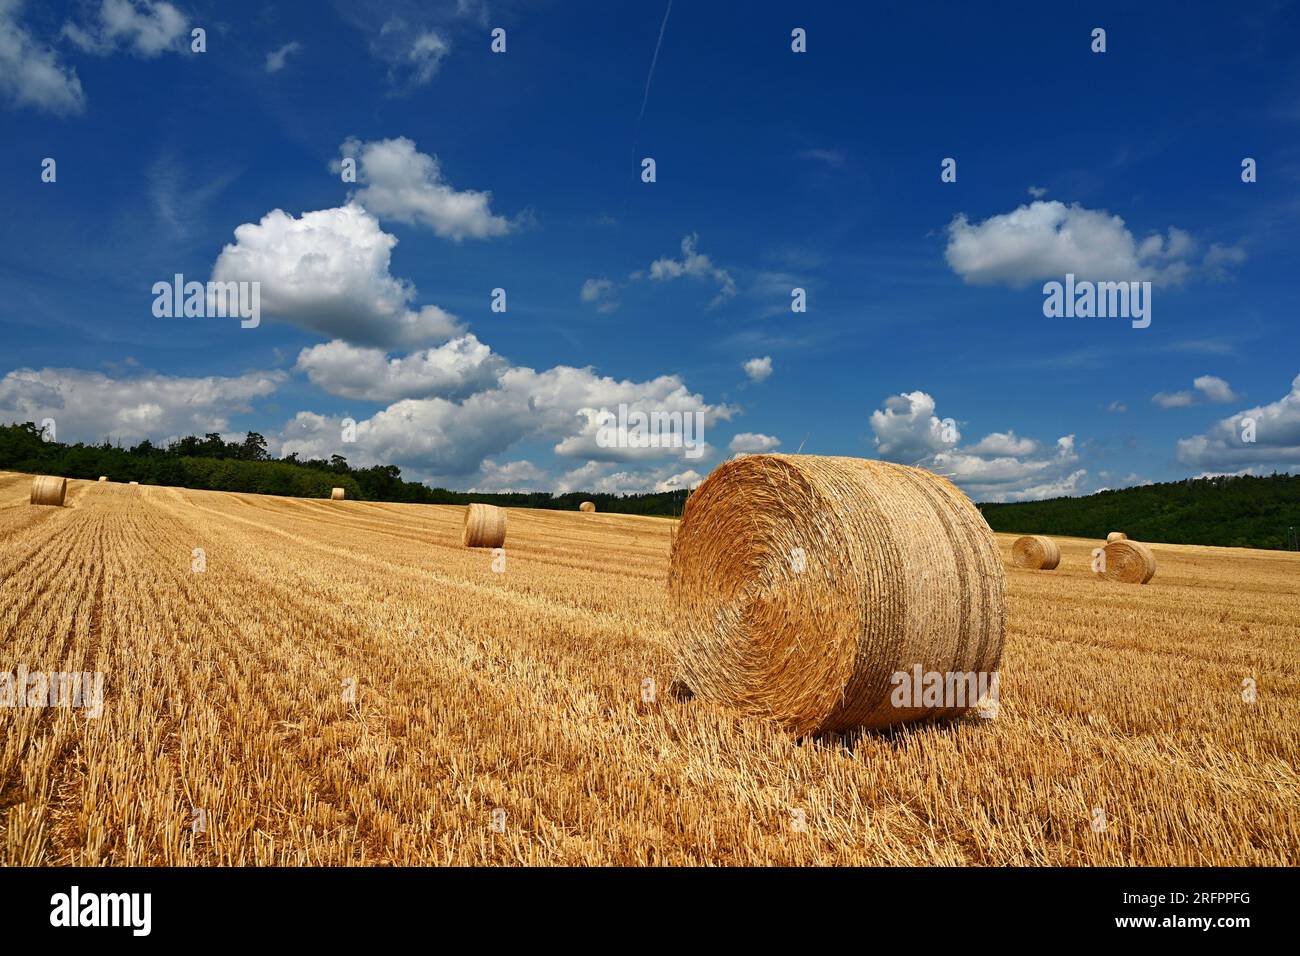 Beautiful summer landscape. Agricultural field. Round bundles of dry grass in the field with bleu sky and sun. Hay bale - haystack. Stock Photo